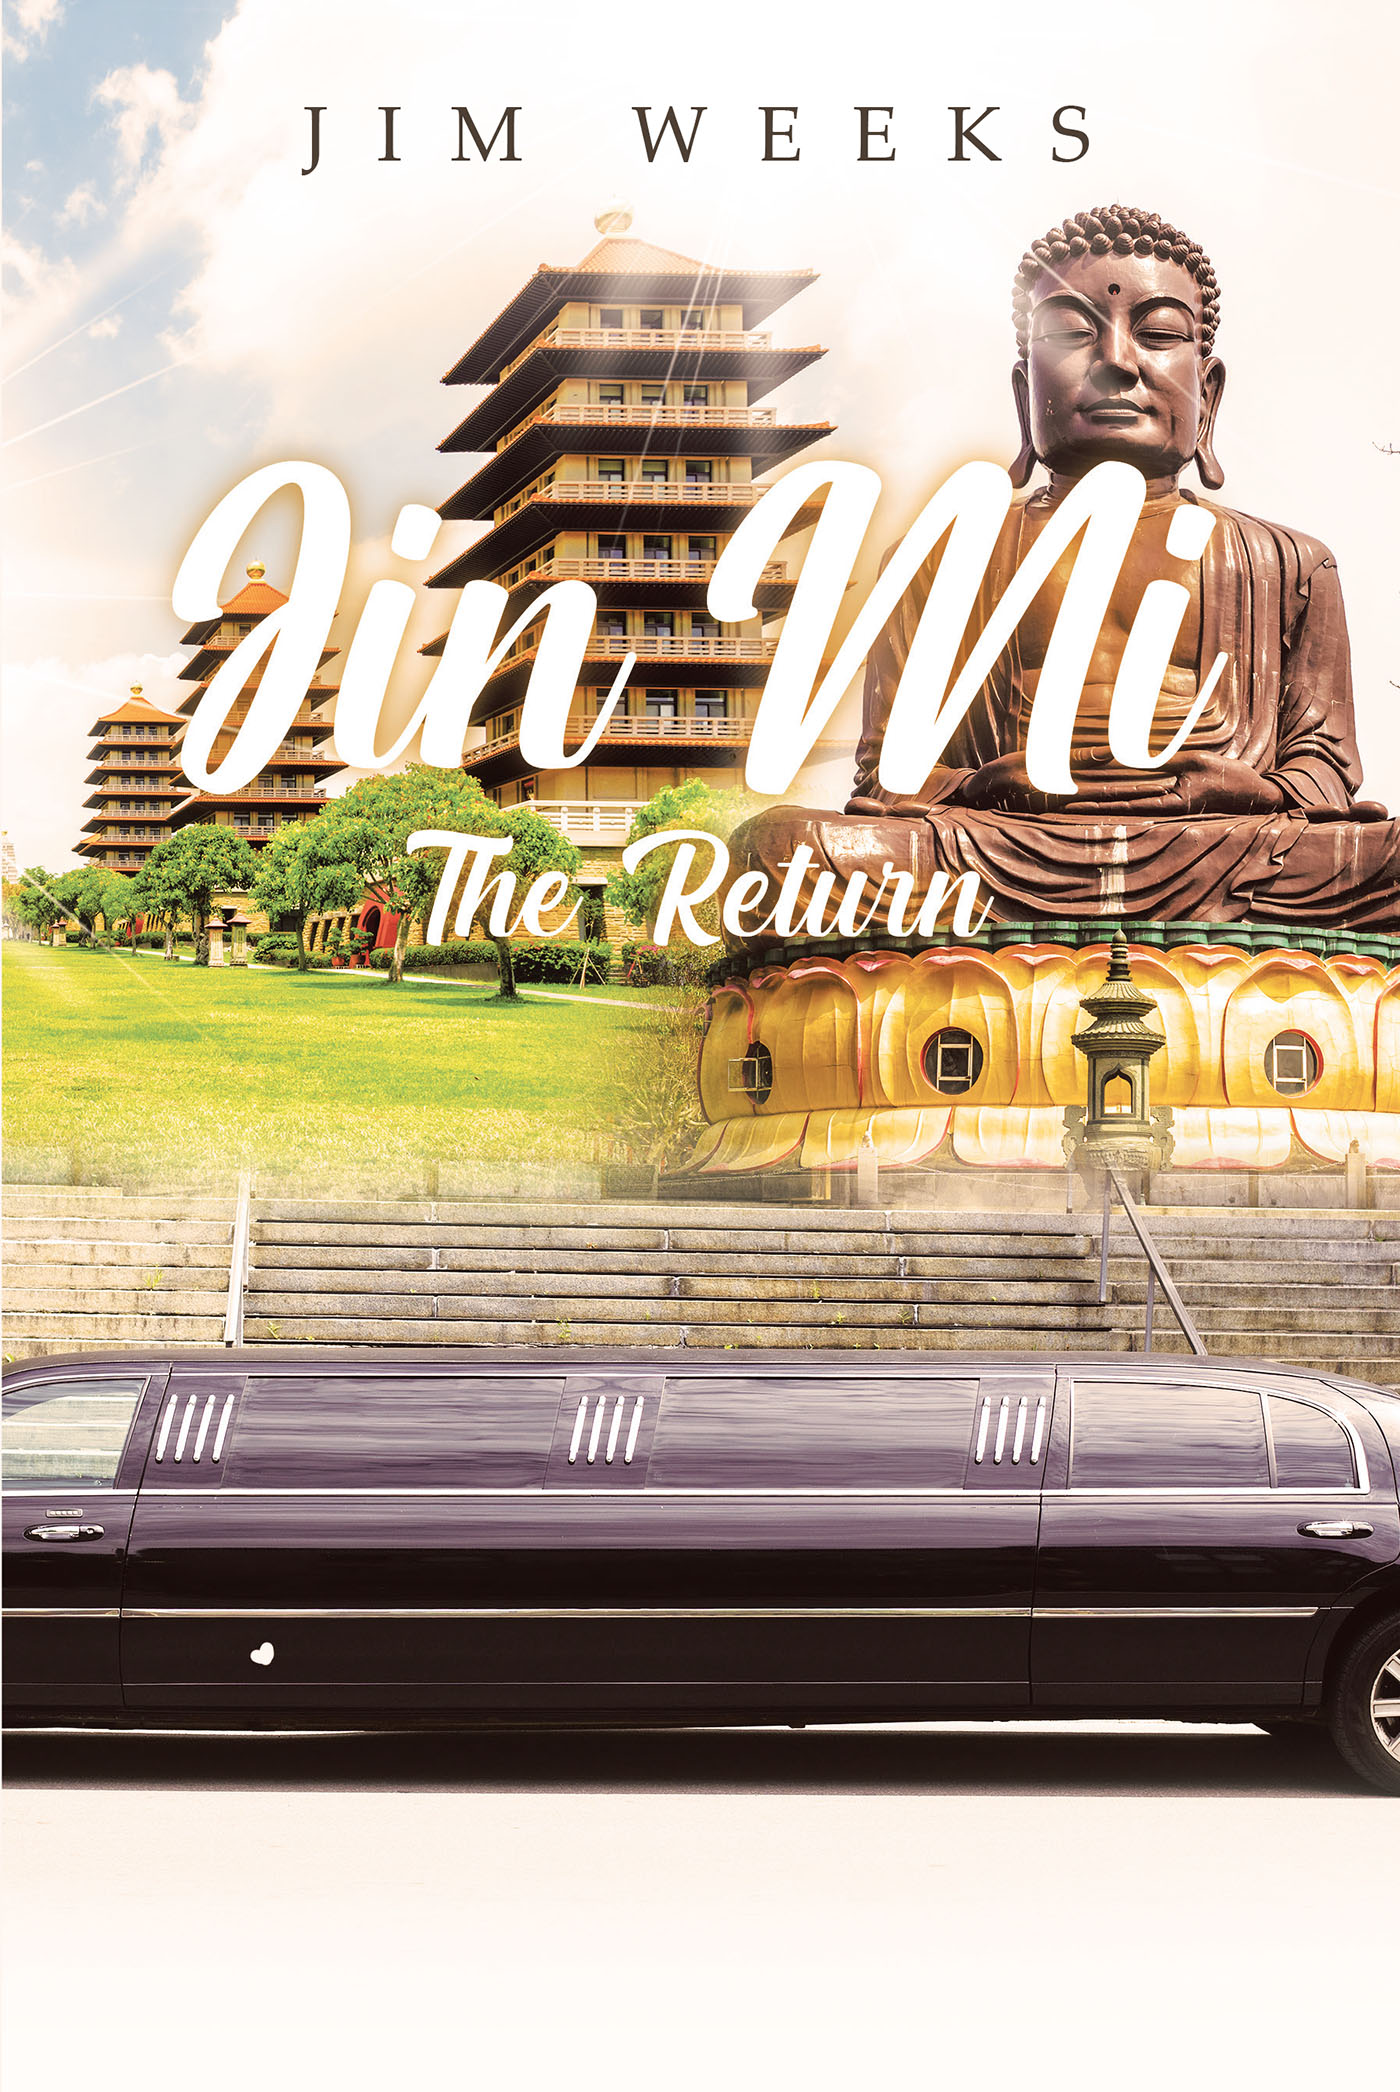 Author Jim Weeks’s New Book, "Jin Mi: The Return," is a Captivating Memoir That Invites Readers to Follow Along on the Author’s Journey Back to Taiwan